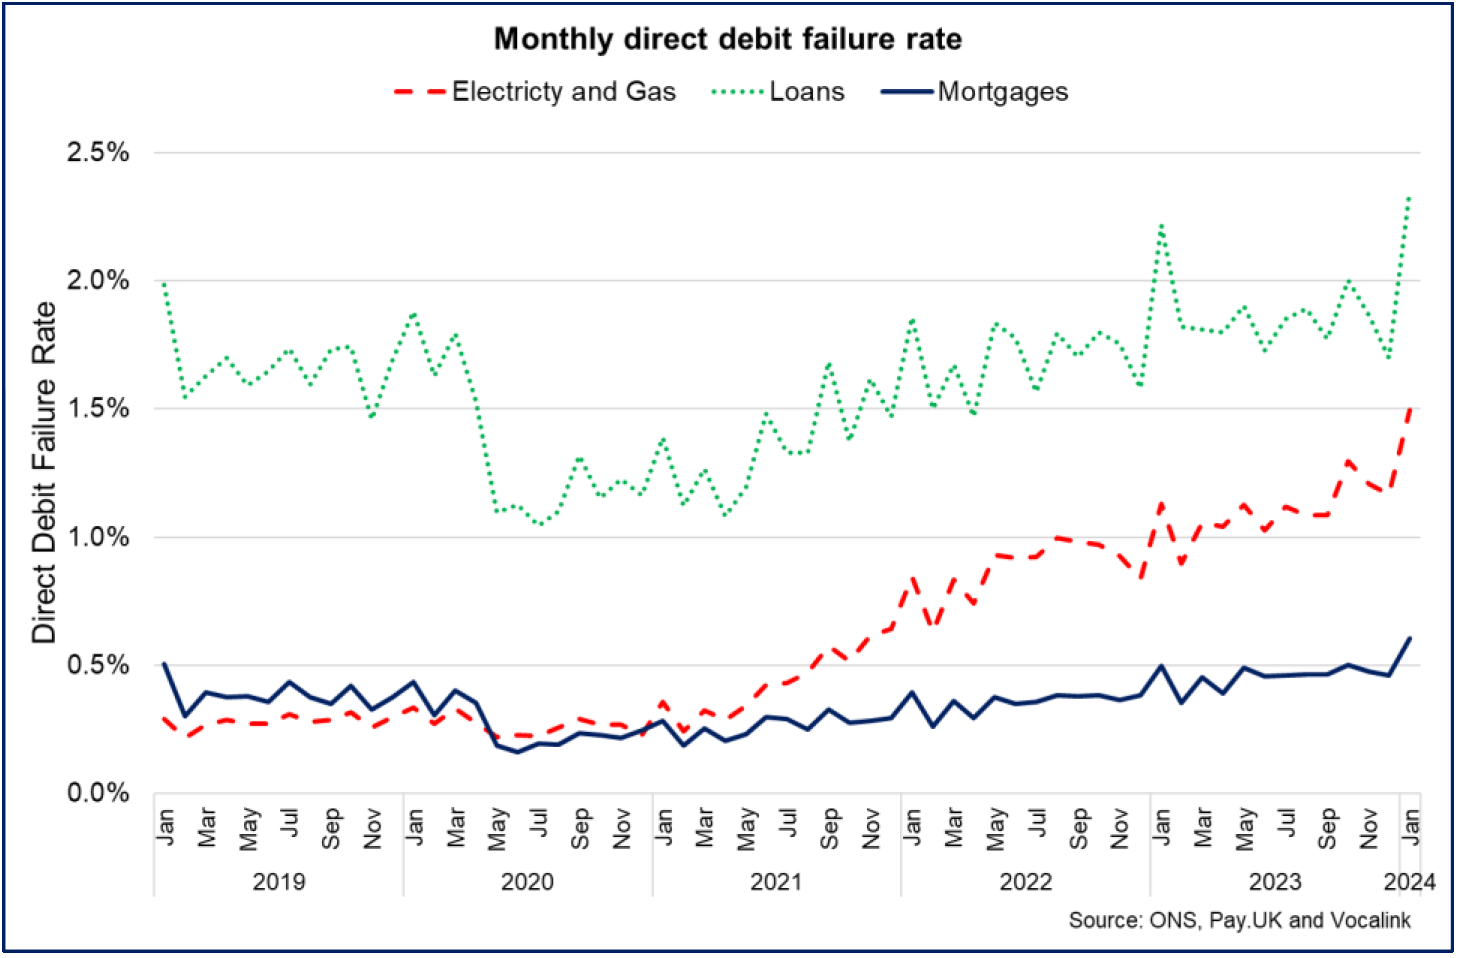 direct debit failure rate for electricity and gas, loans and mortgages payments has risen over 2022, 2023 and into 2024